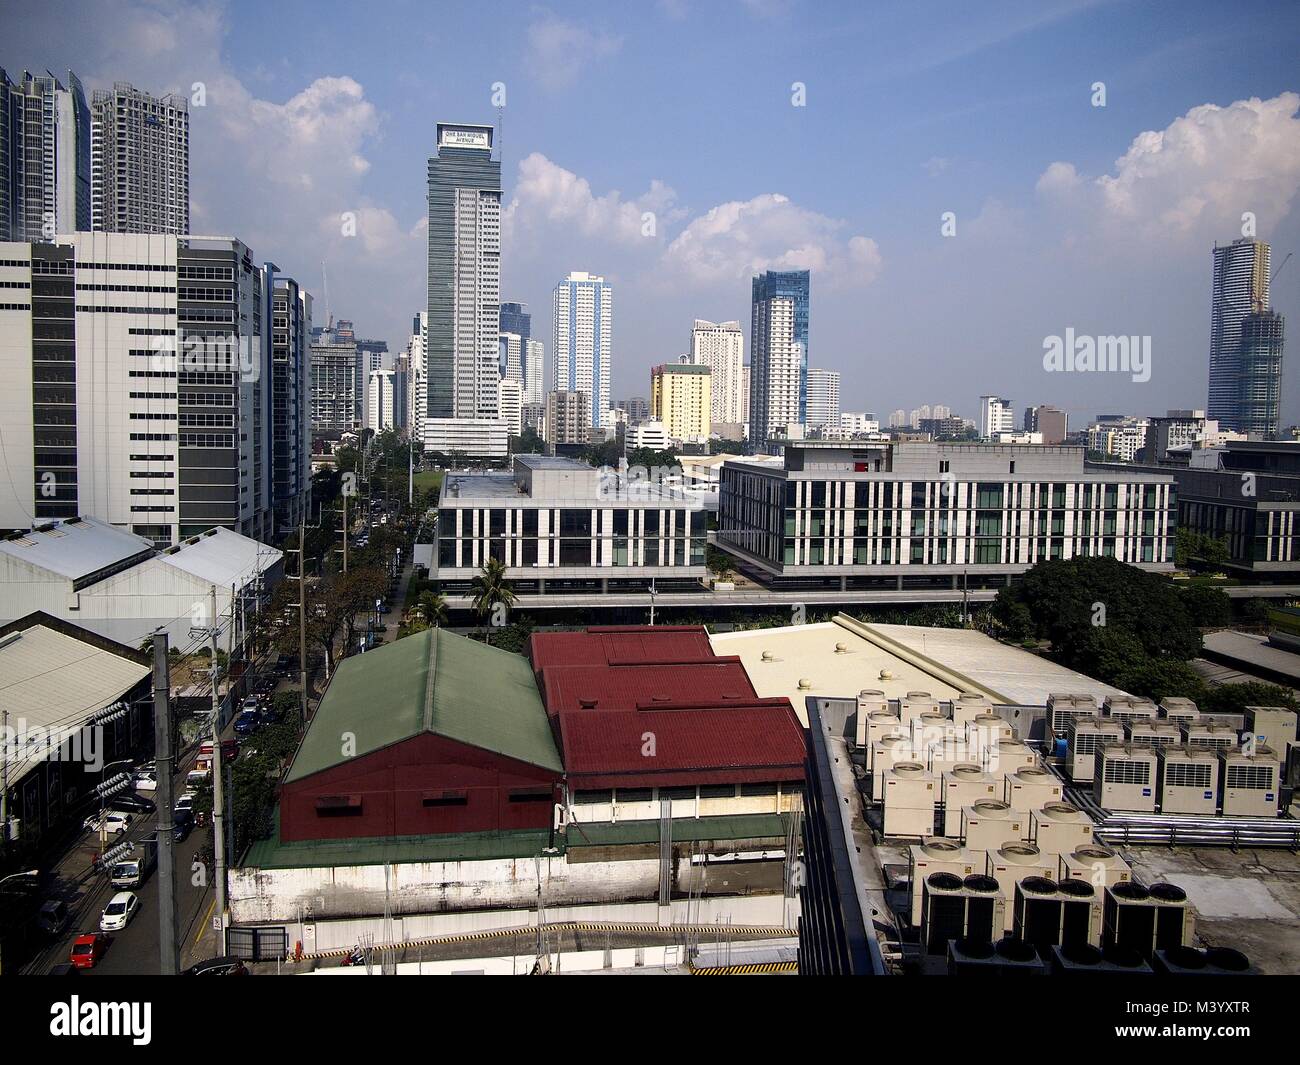 MANDALUYONG CITY, PHILIPPINES - FEBRUARY 1, 2018: Buildings and skyscrapers in the central business district of Mandaluyong City, Philippines. Stock Photo